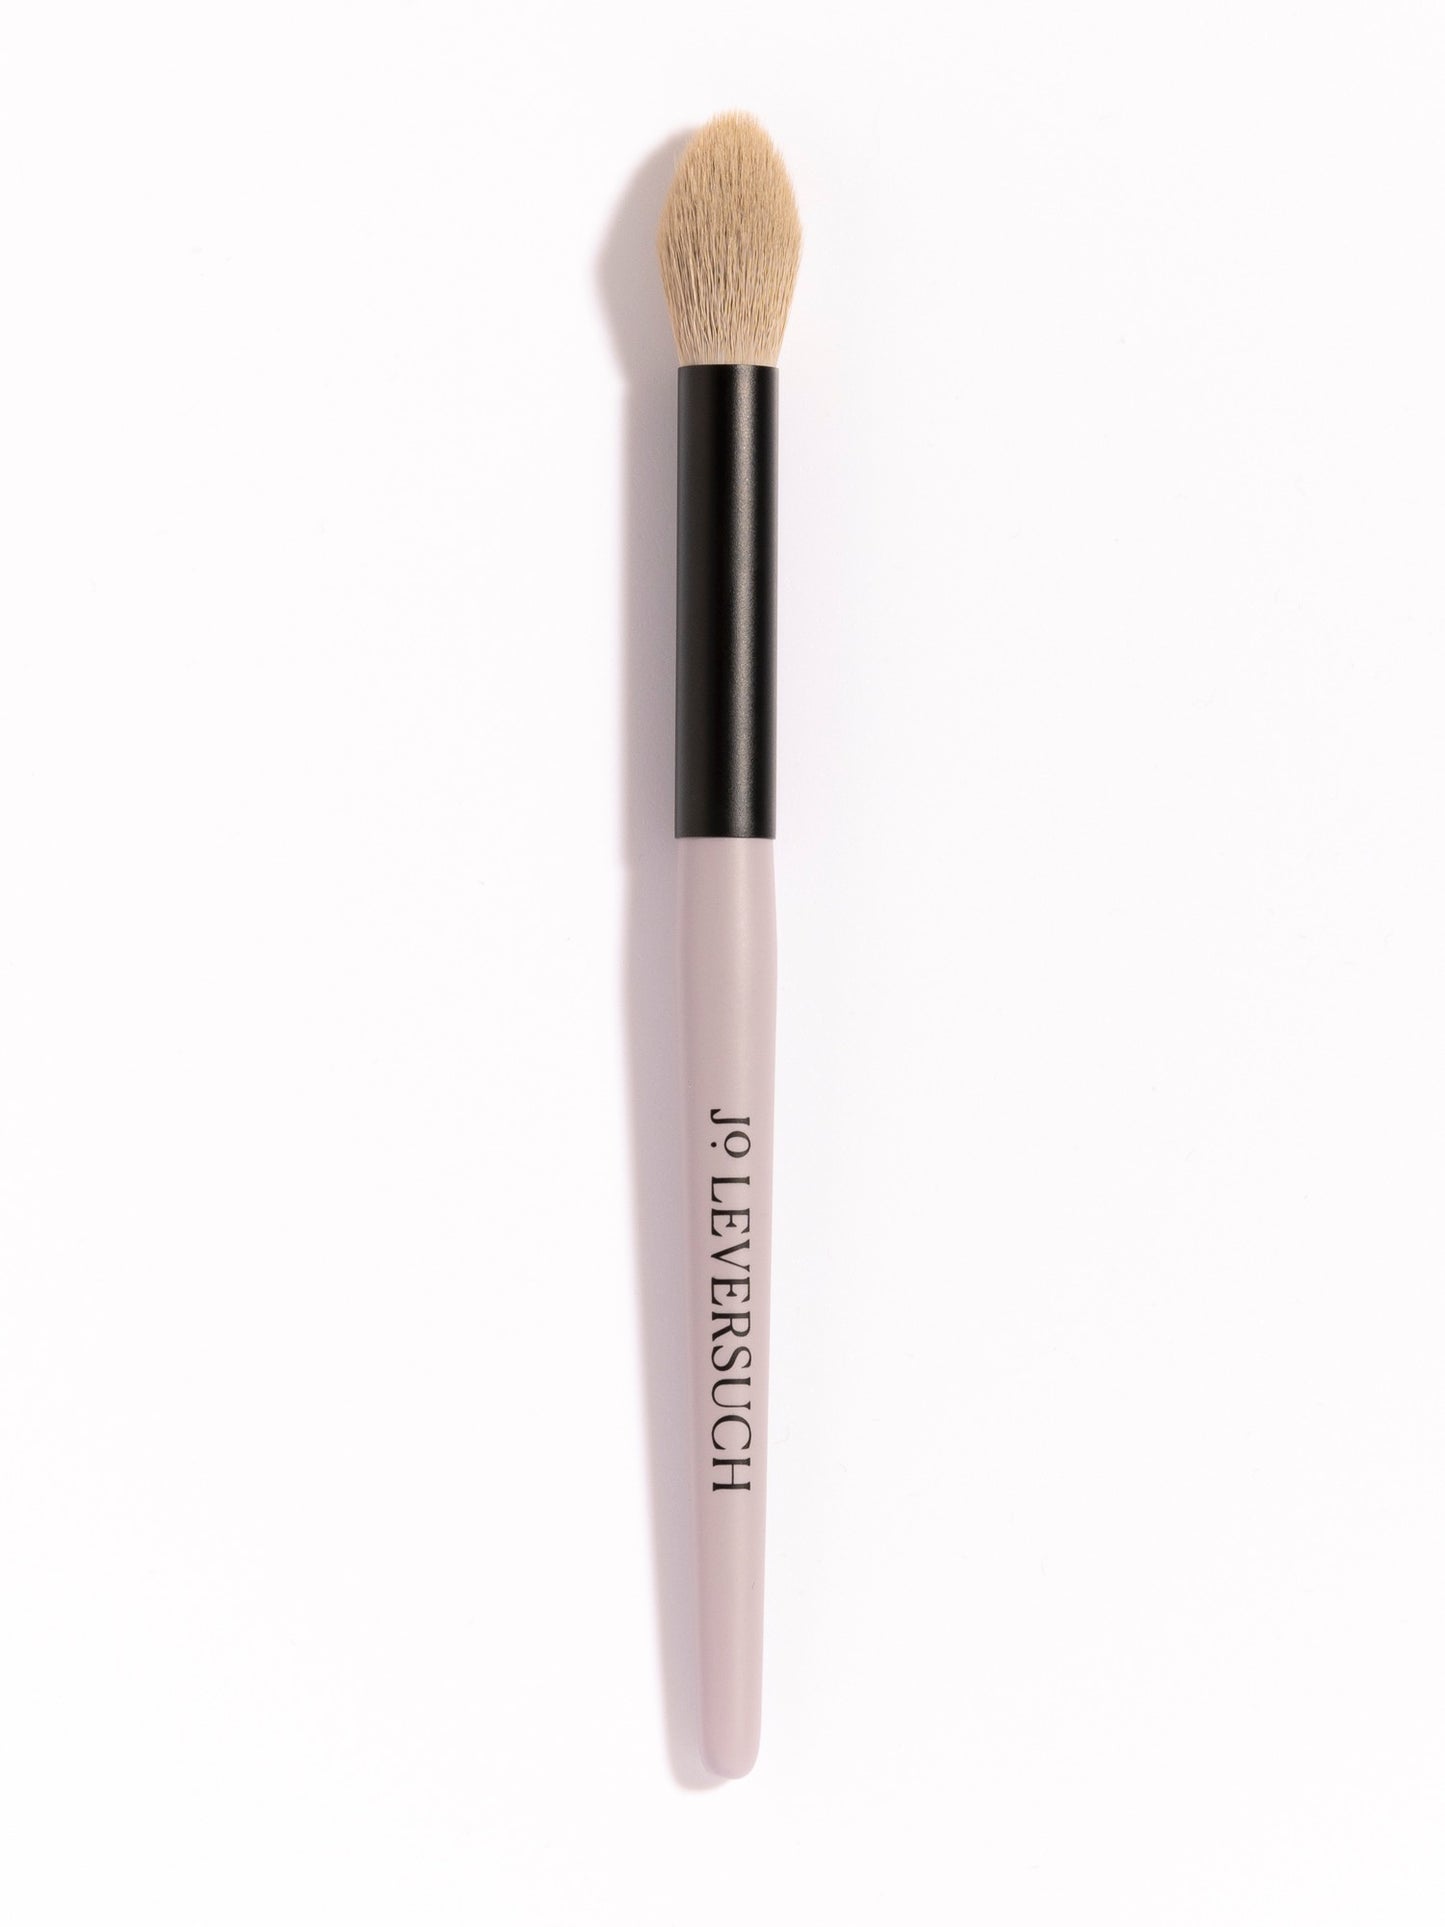 Untitled No 1 Jo Leversuch multi use powder makeup brush with synthetic hair  